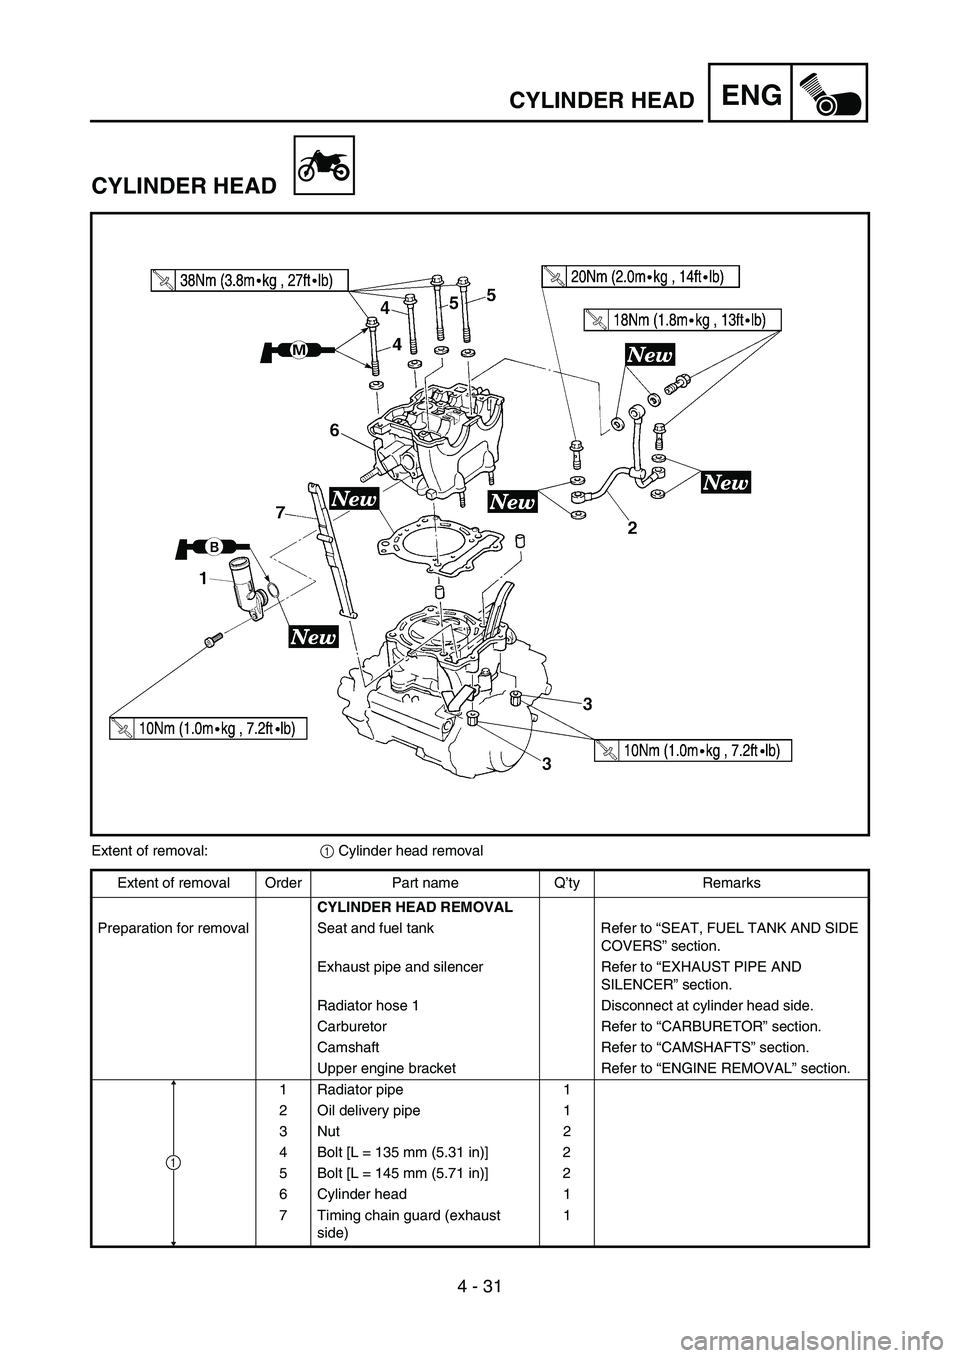 YAMAHA YZ250F 2007  Owners Manual 4 - 31
ENGCYLINDER HEAD
CYLINDER HEAD
Extent of removal:
1 Cylinder head removal
Extent of removal Order Part name Q’ty Remarks
CYLINDER HEAD REMOVAL
Preparation for removal Seat and fuel tank Refer